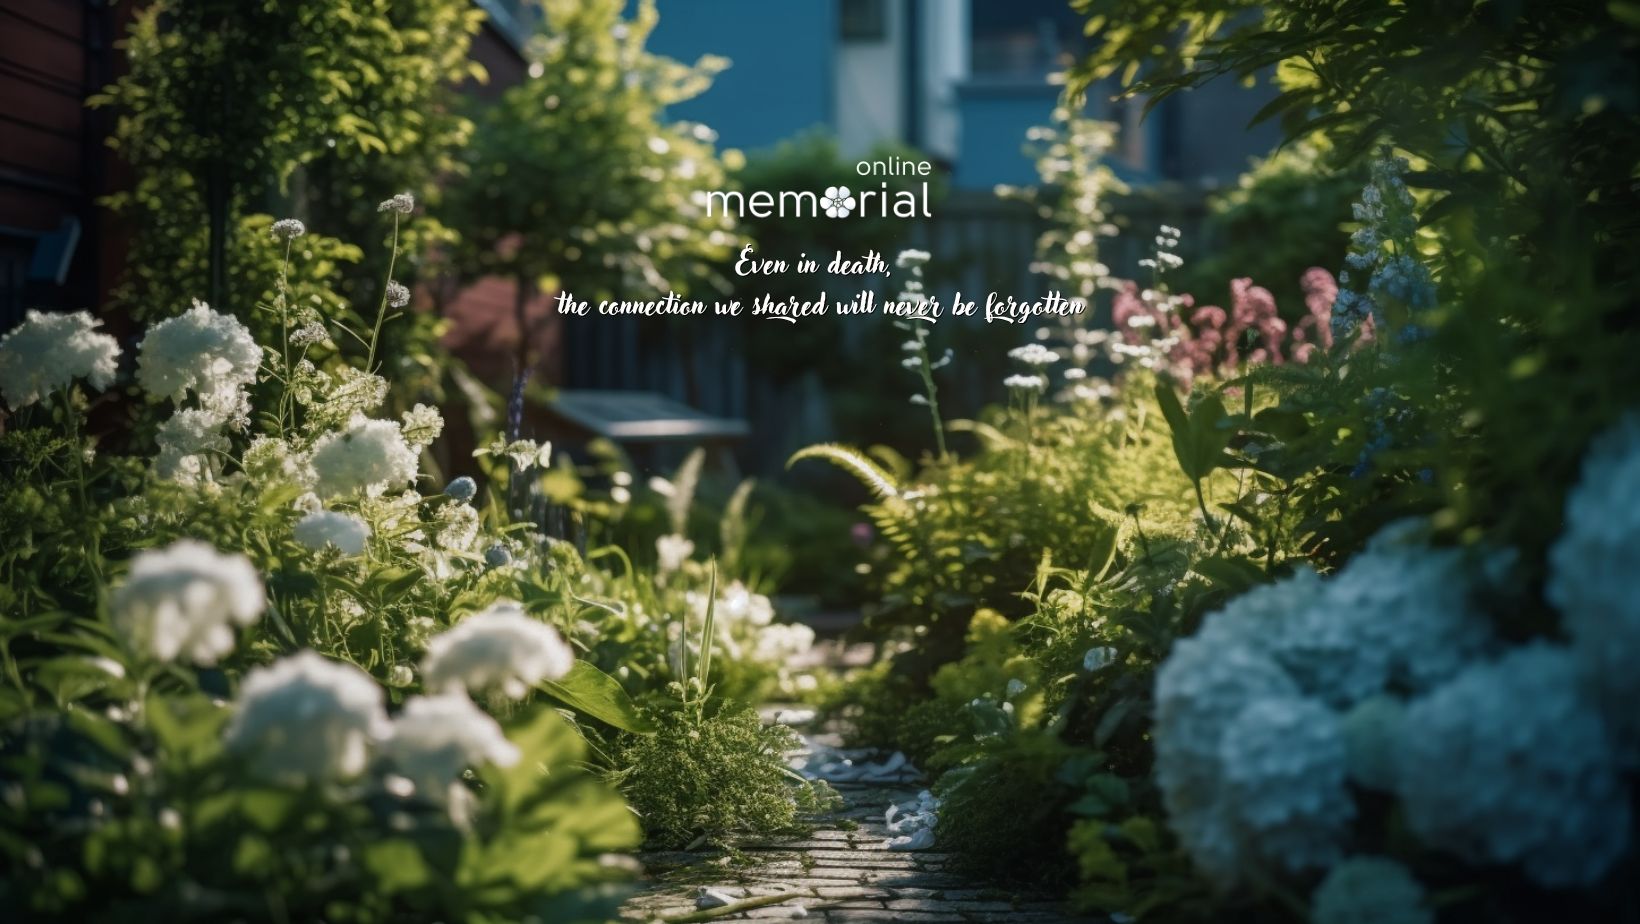 Memorial Online: Digital Funeral Services in the Modern Age